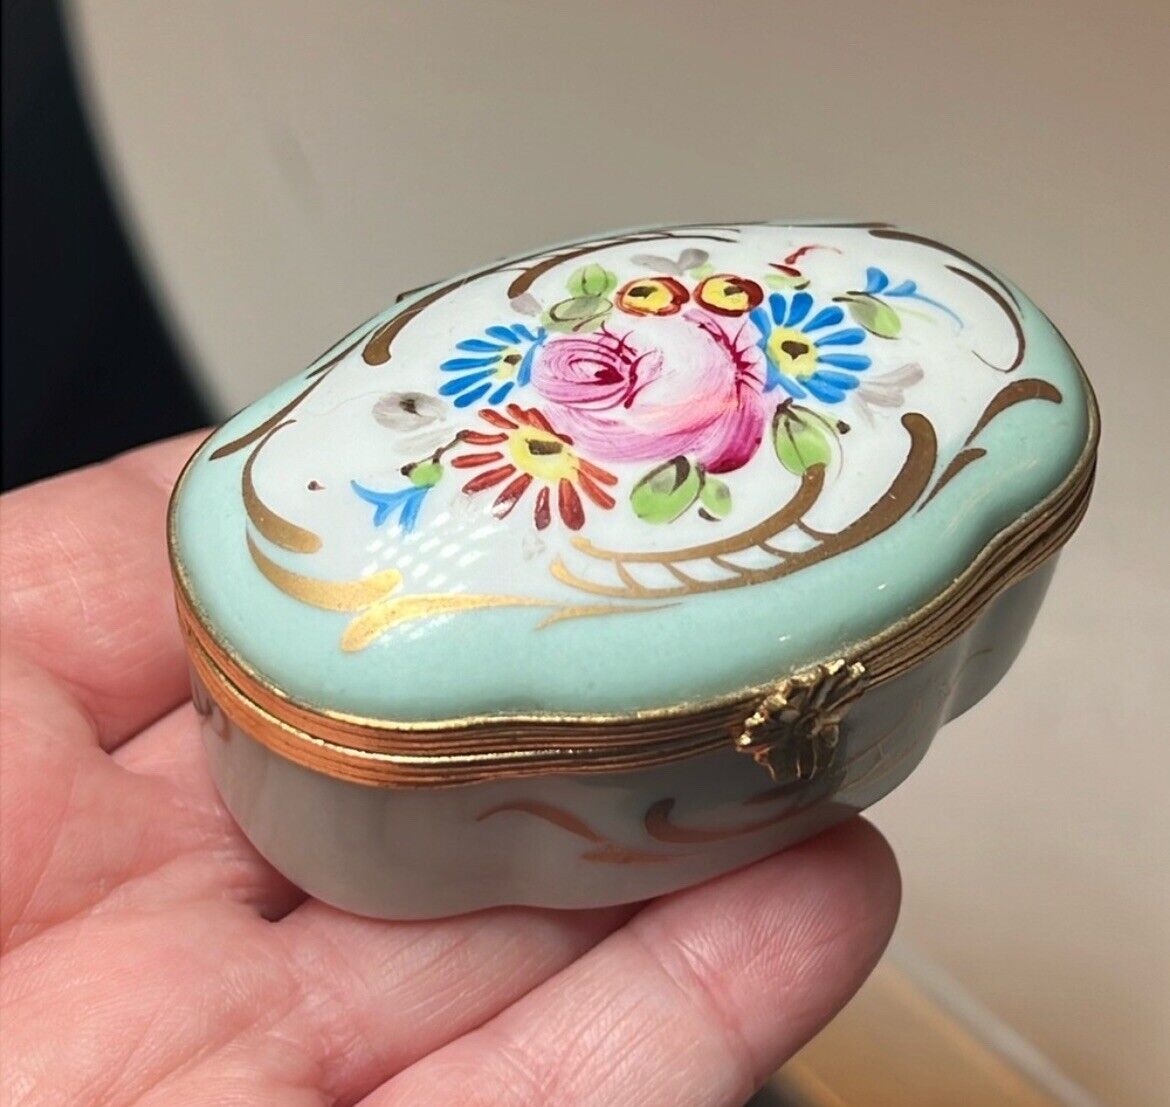 VTG Hand Painted French Porcelain Ceramic Pillbox LORD & TAYLOR Excellent Cond’